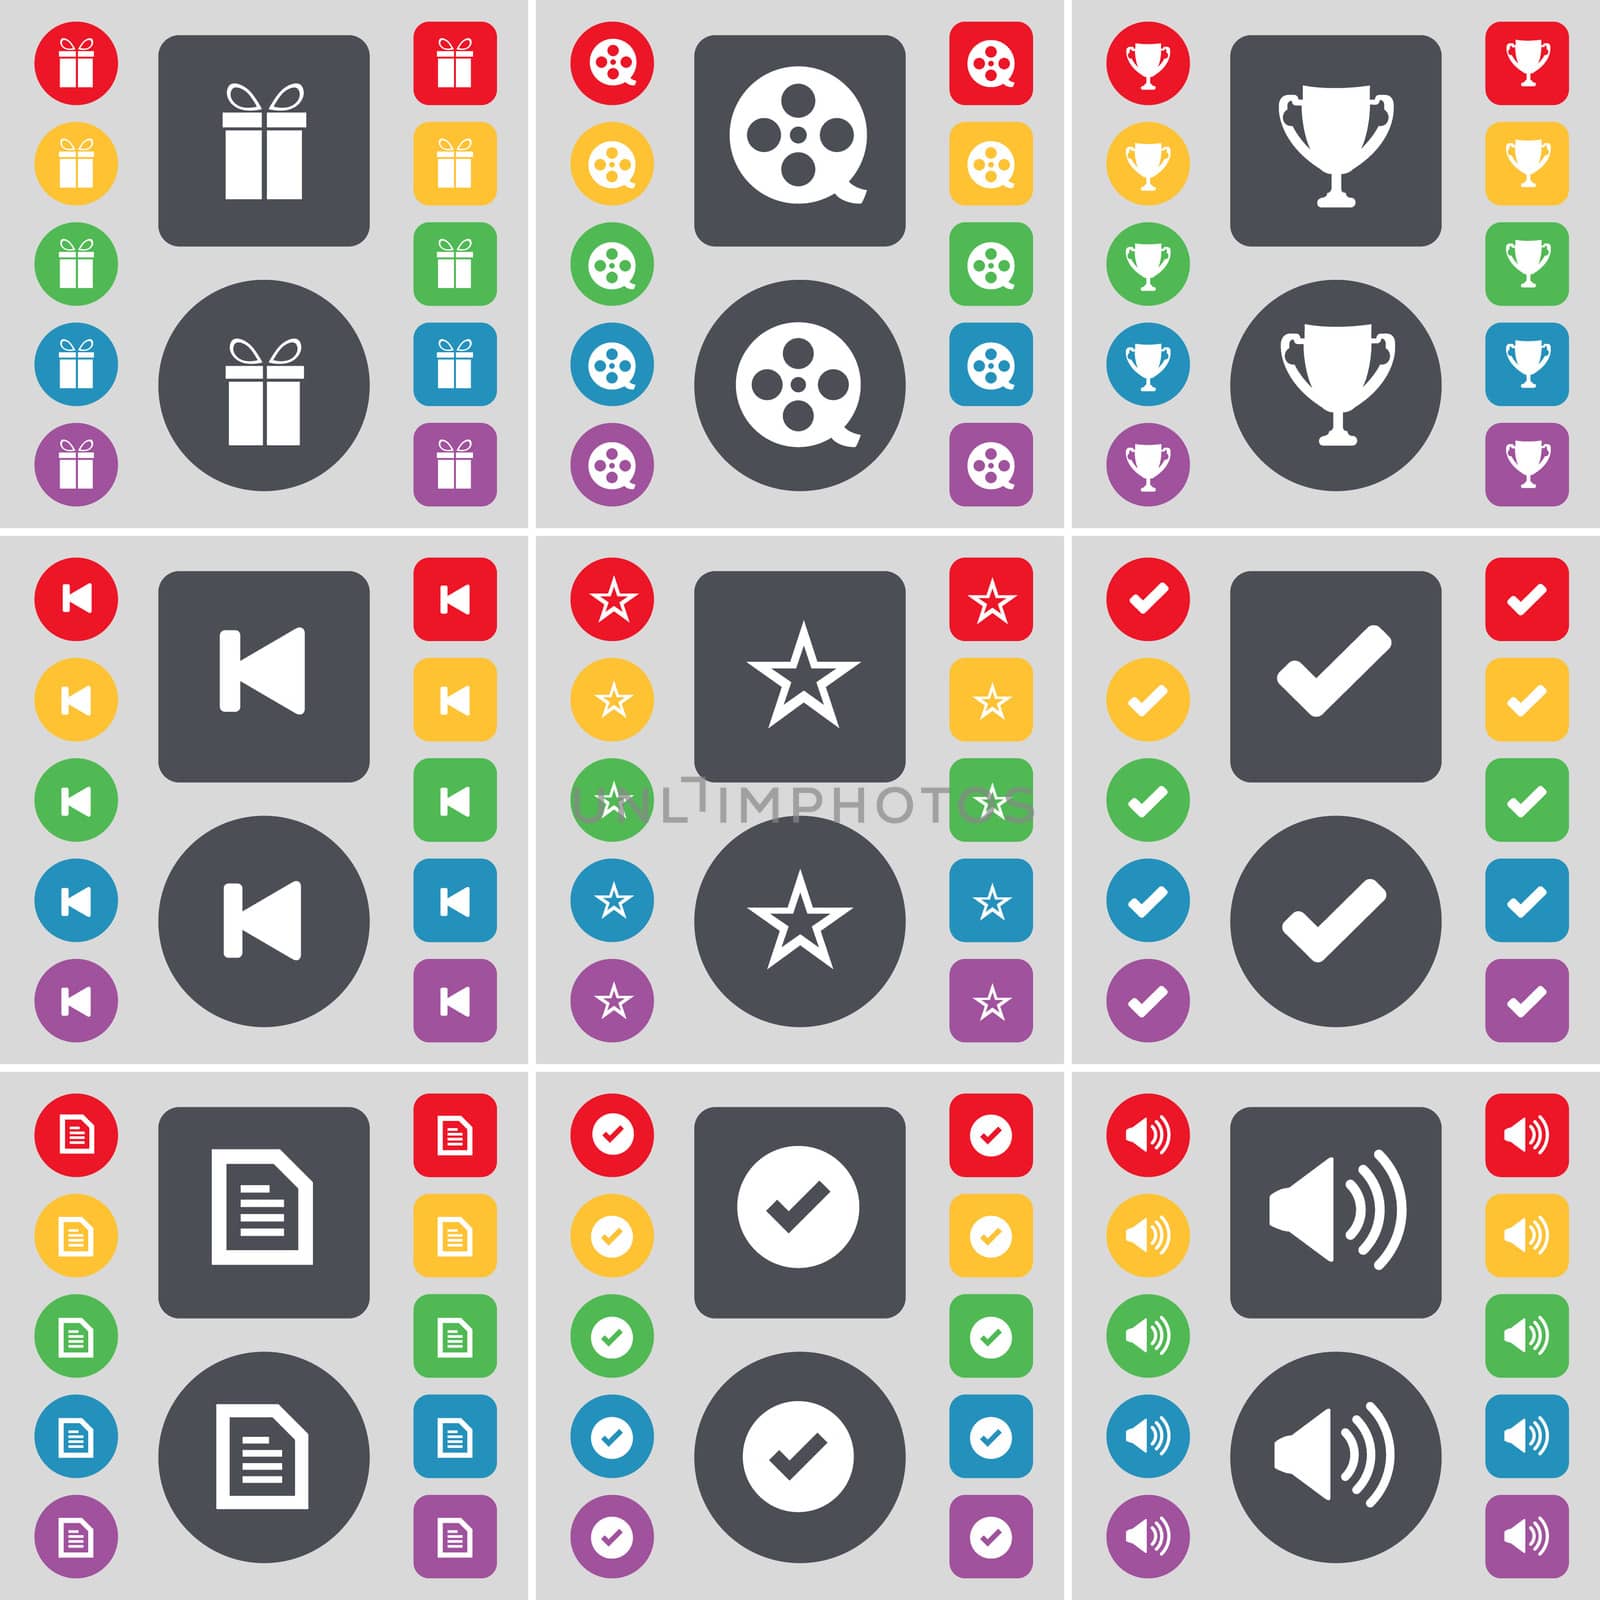 Gift, Videotape, Cup, Media skip, Star, Tick, Text file, Sound icon symbol. A large set of flat, colored buttons for your design. illustration